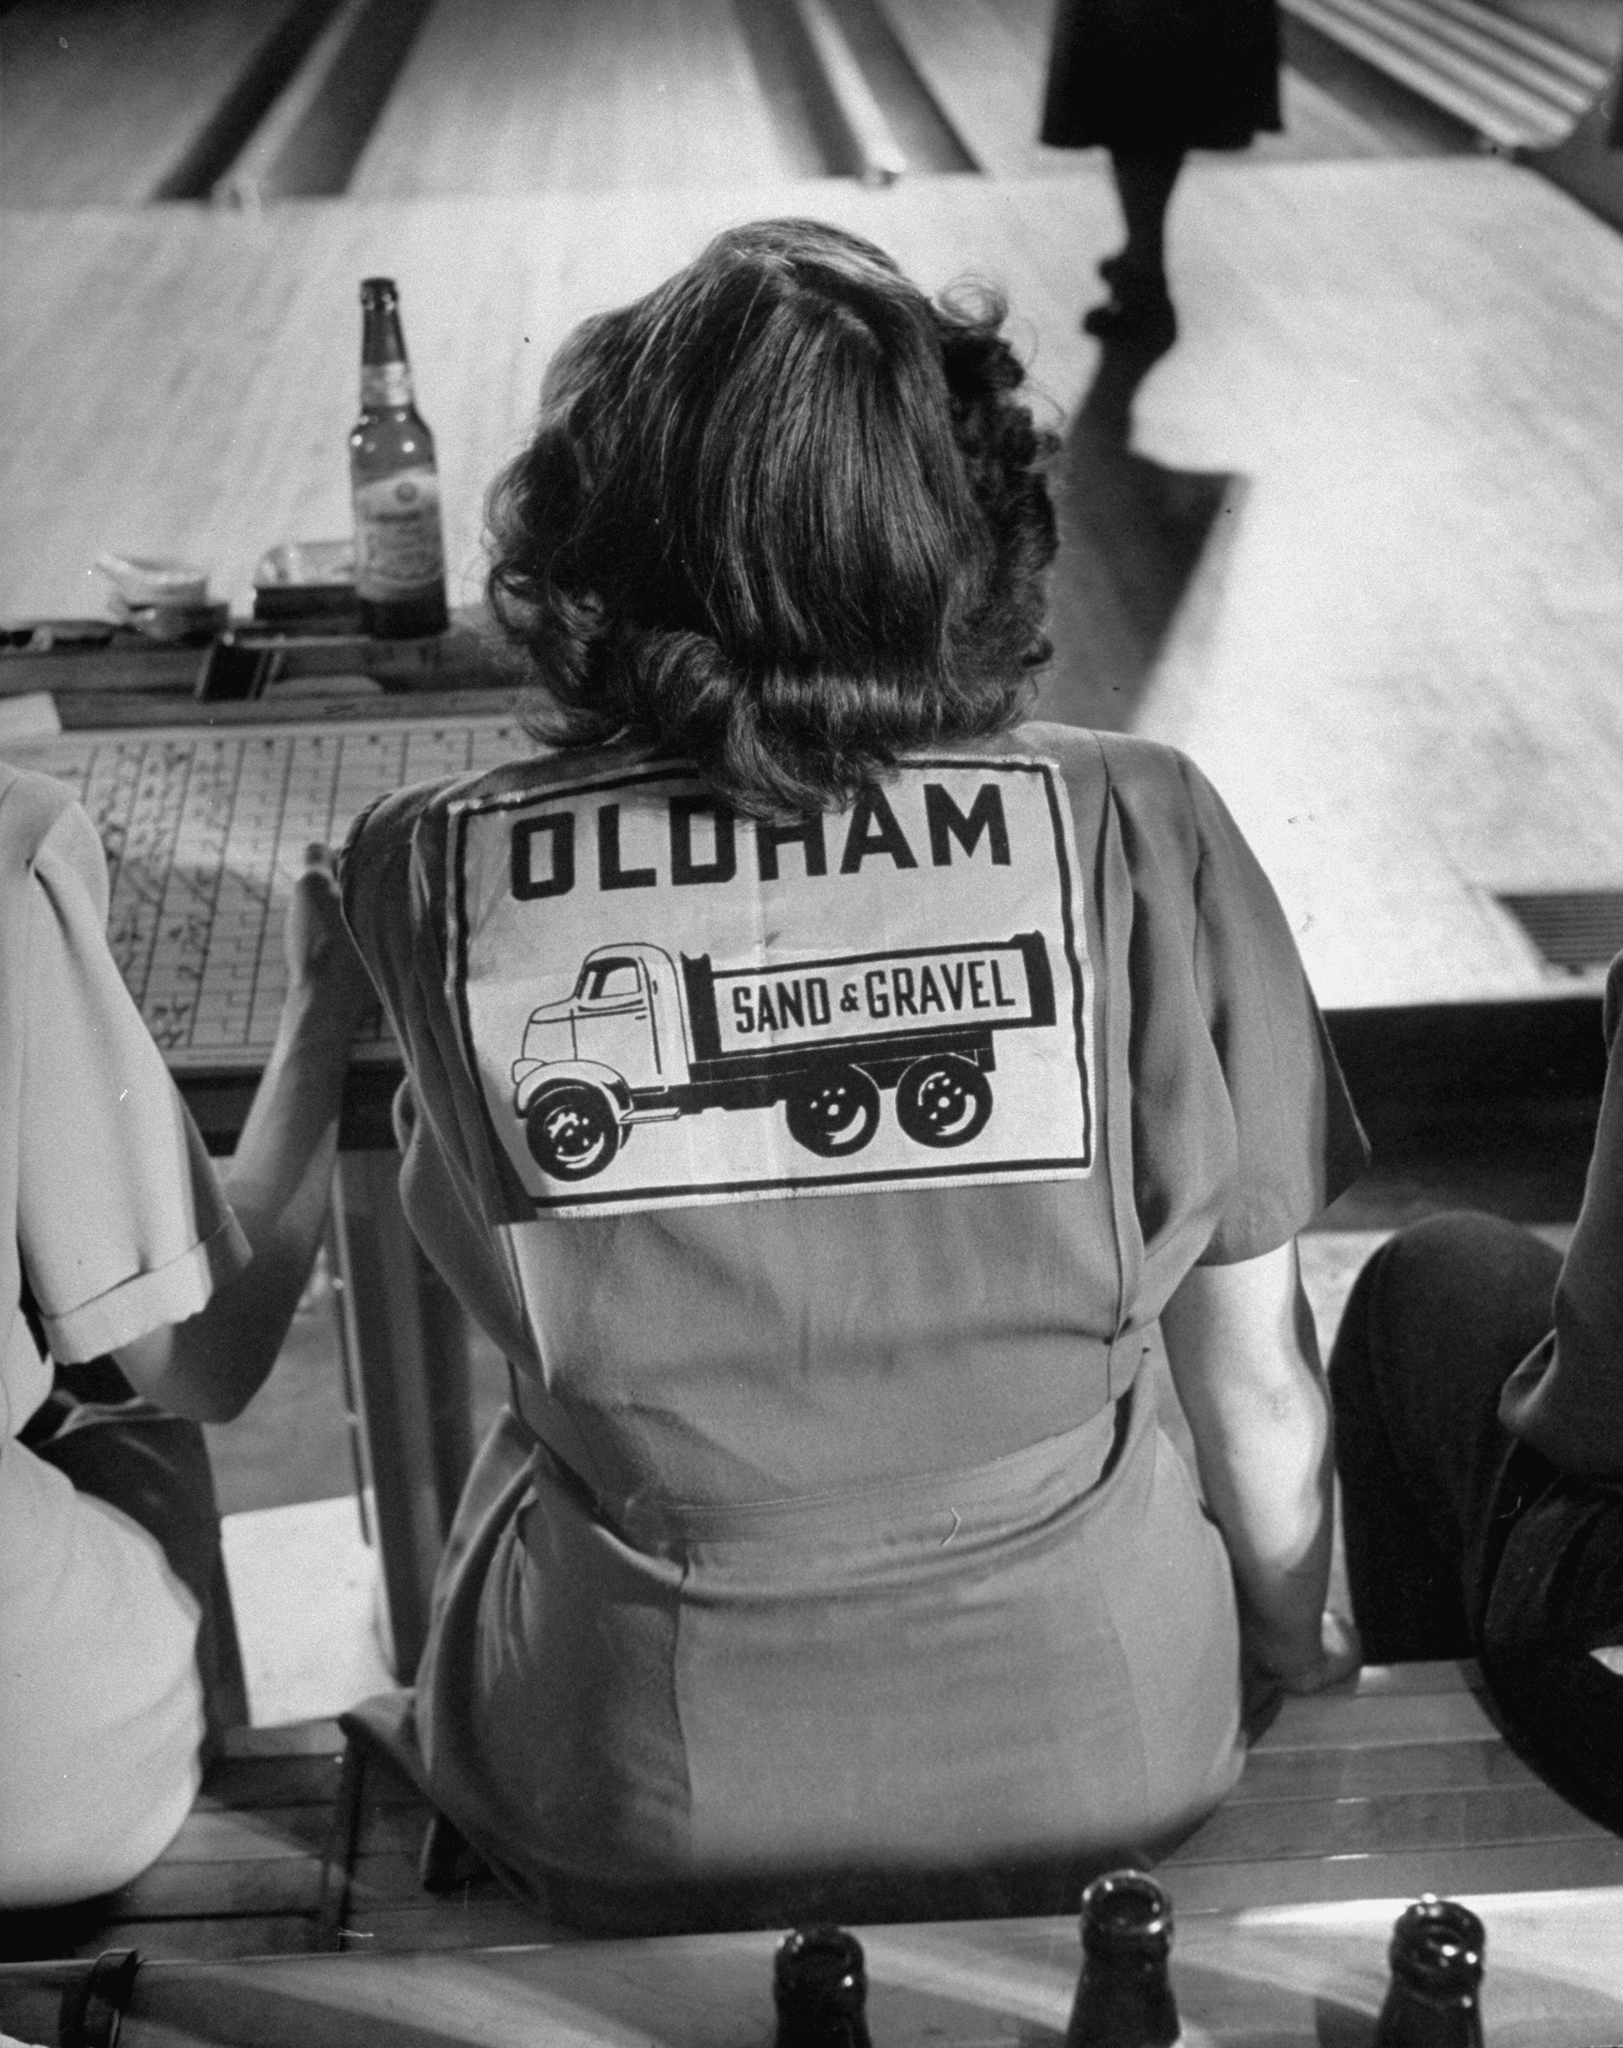 A female bowling team member wears a shirt representing her team and sponsor.